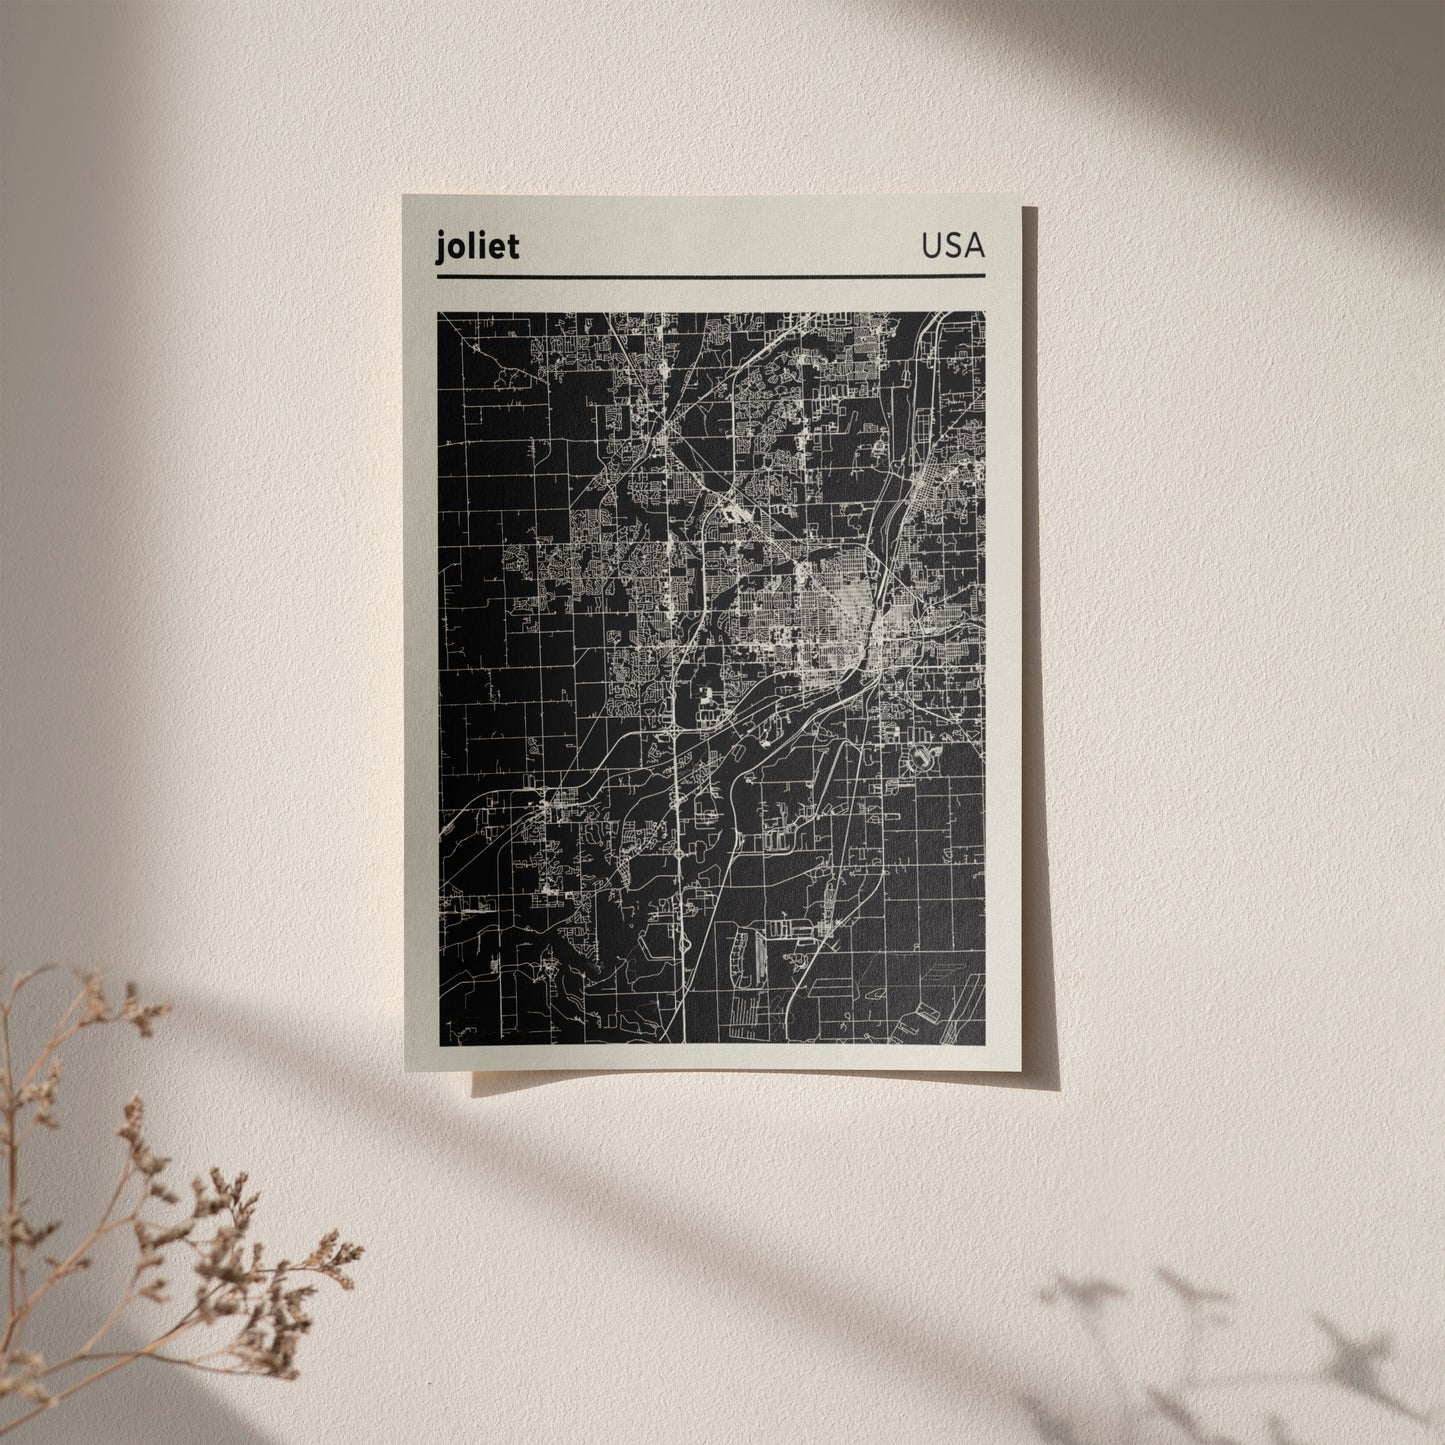 Joliet, USA black and white city map poster